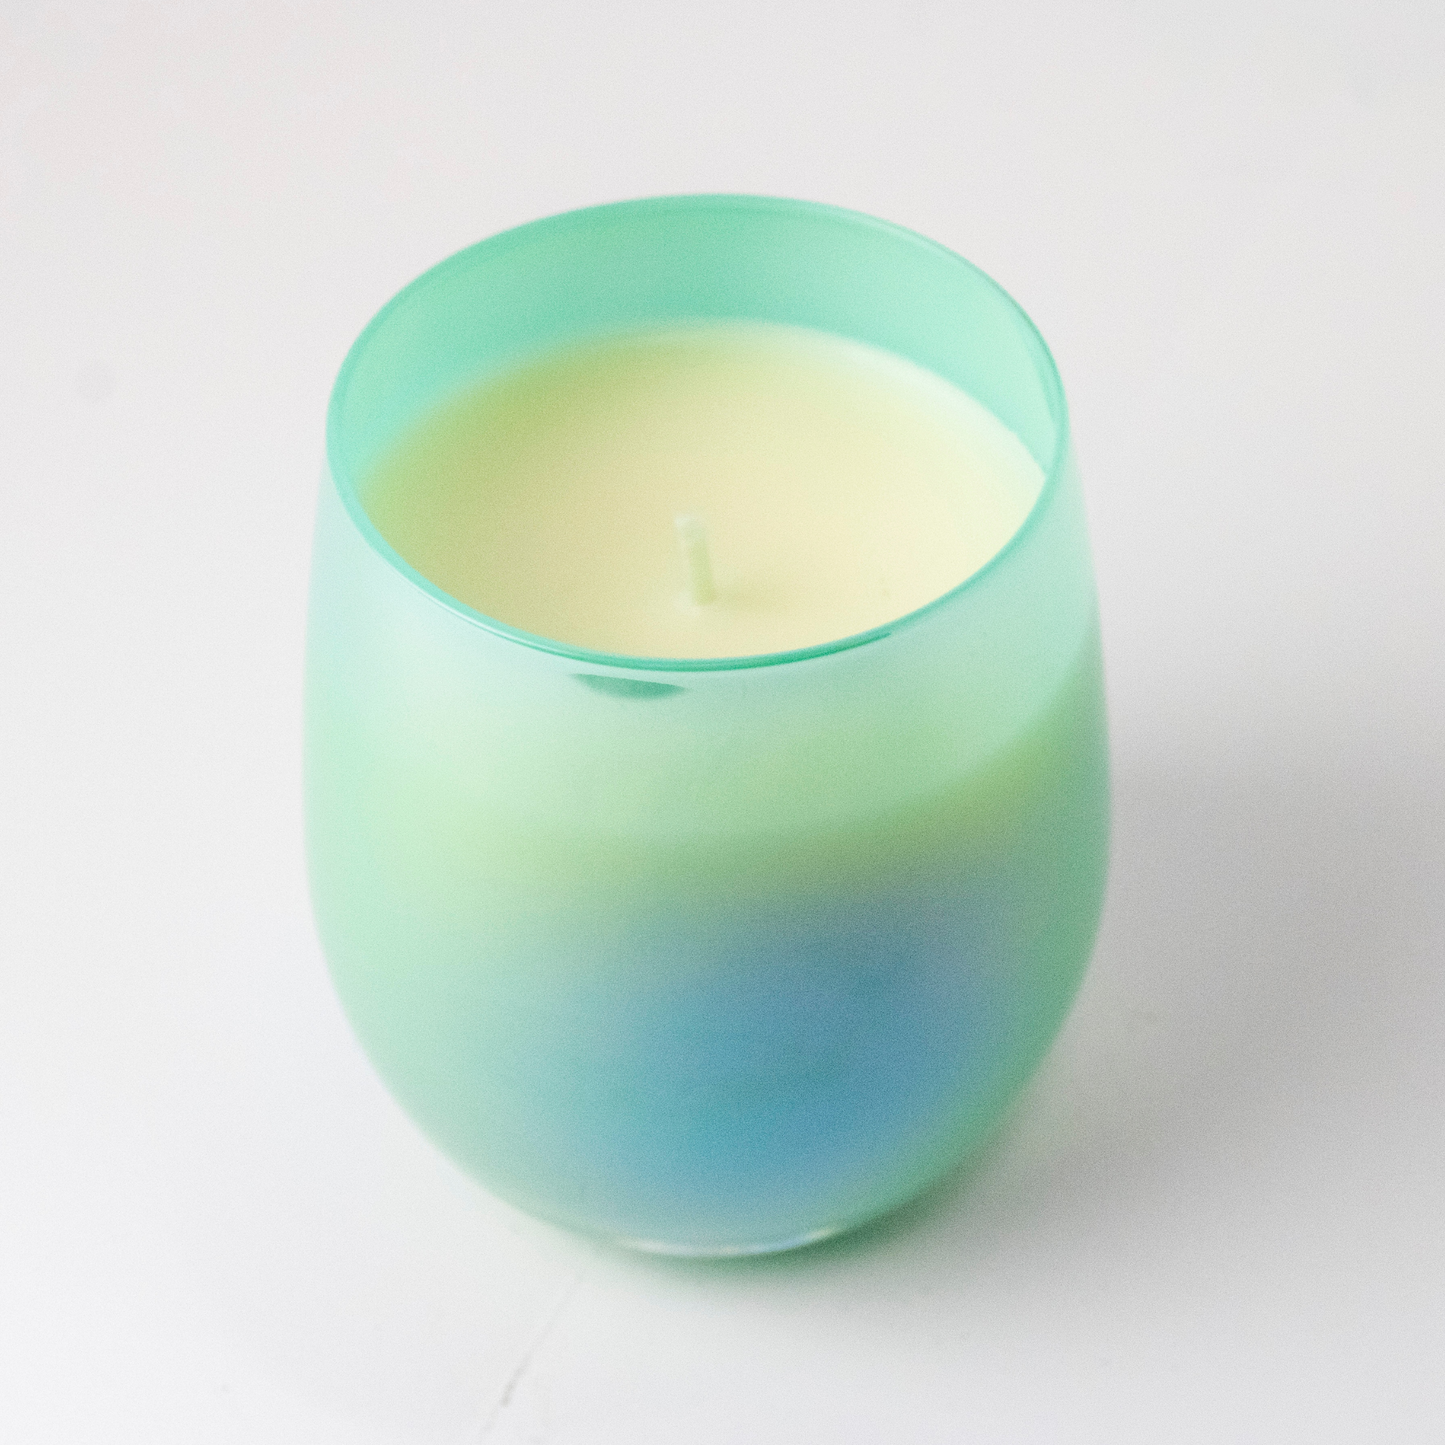 Dough Bowl Candles to Add Fragrance and Design to Your Home